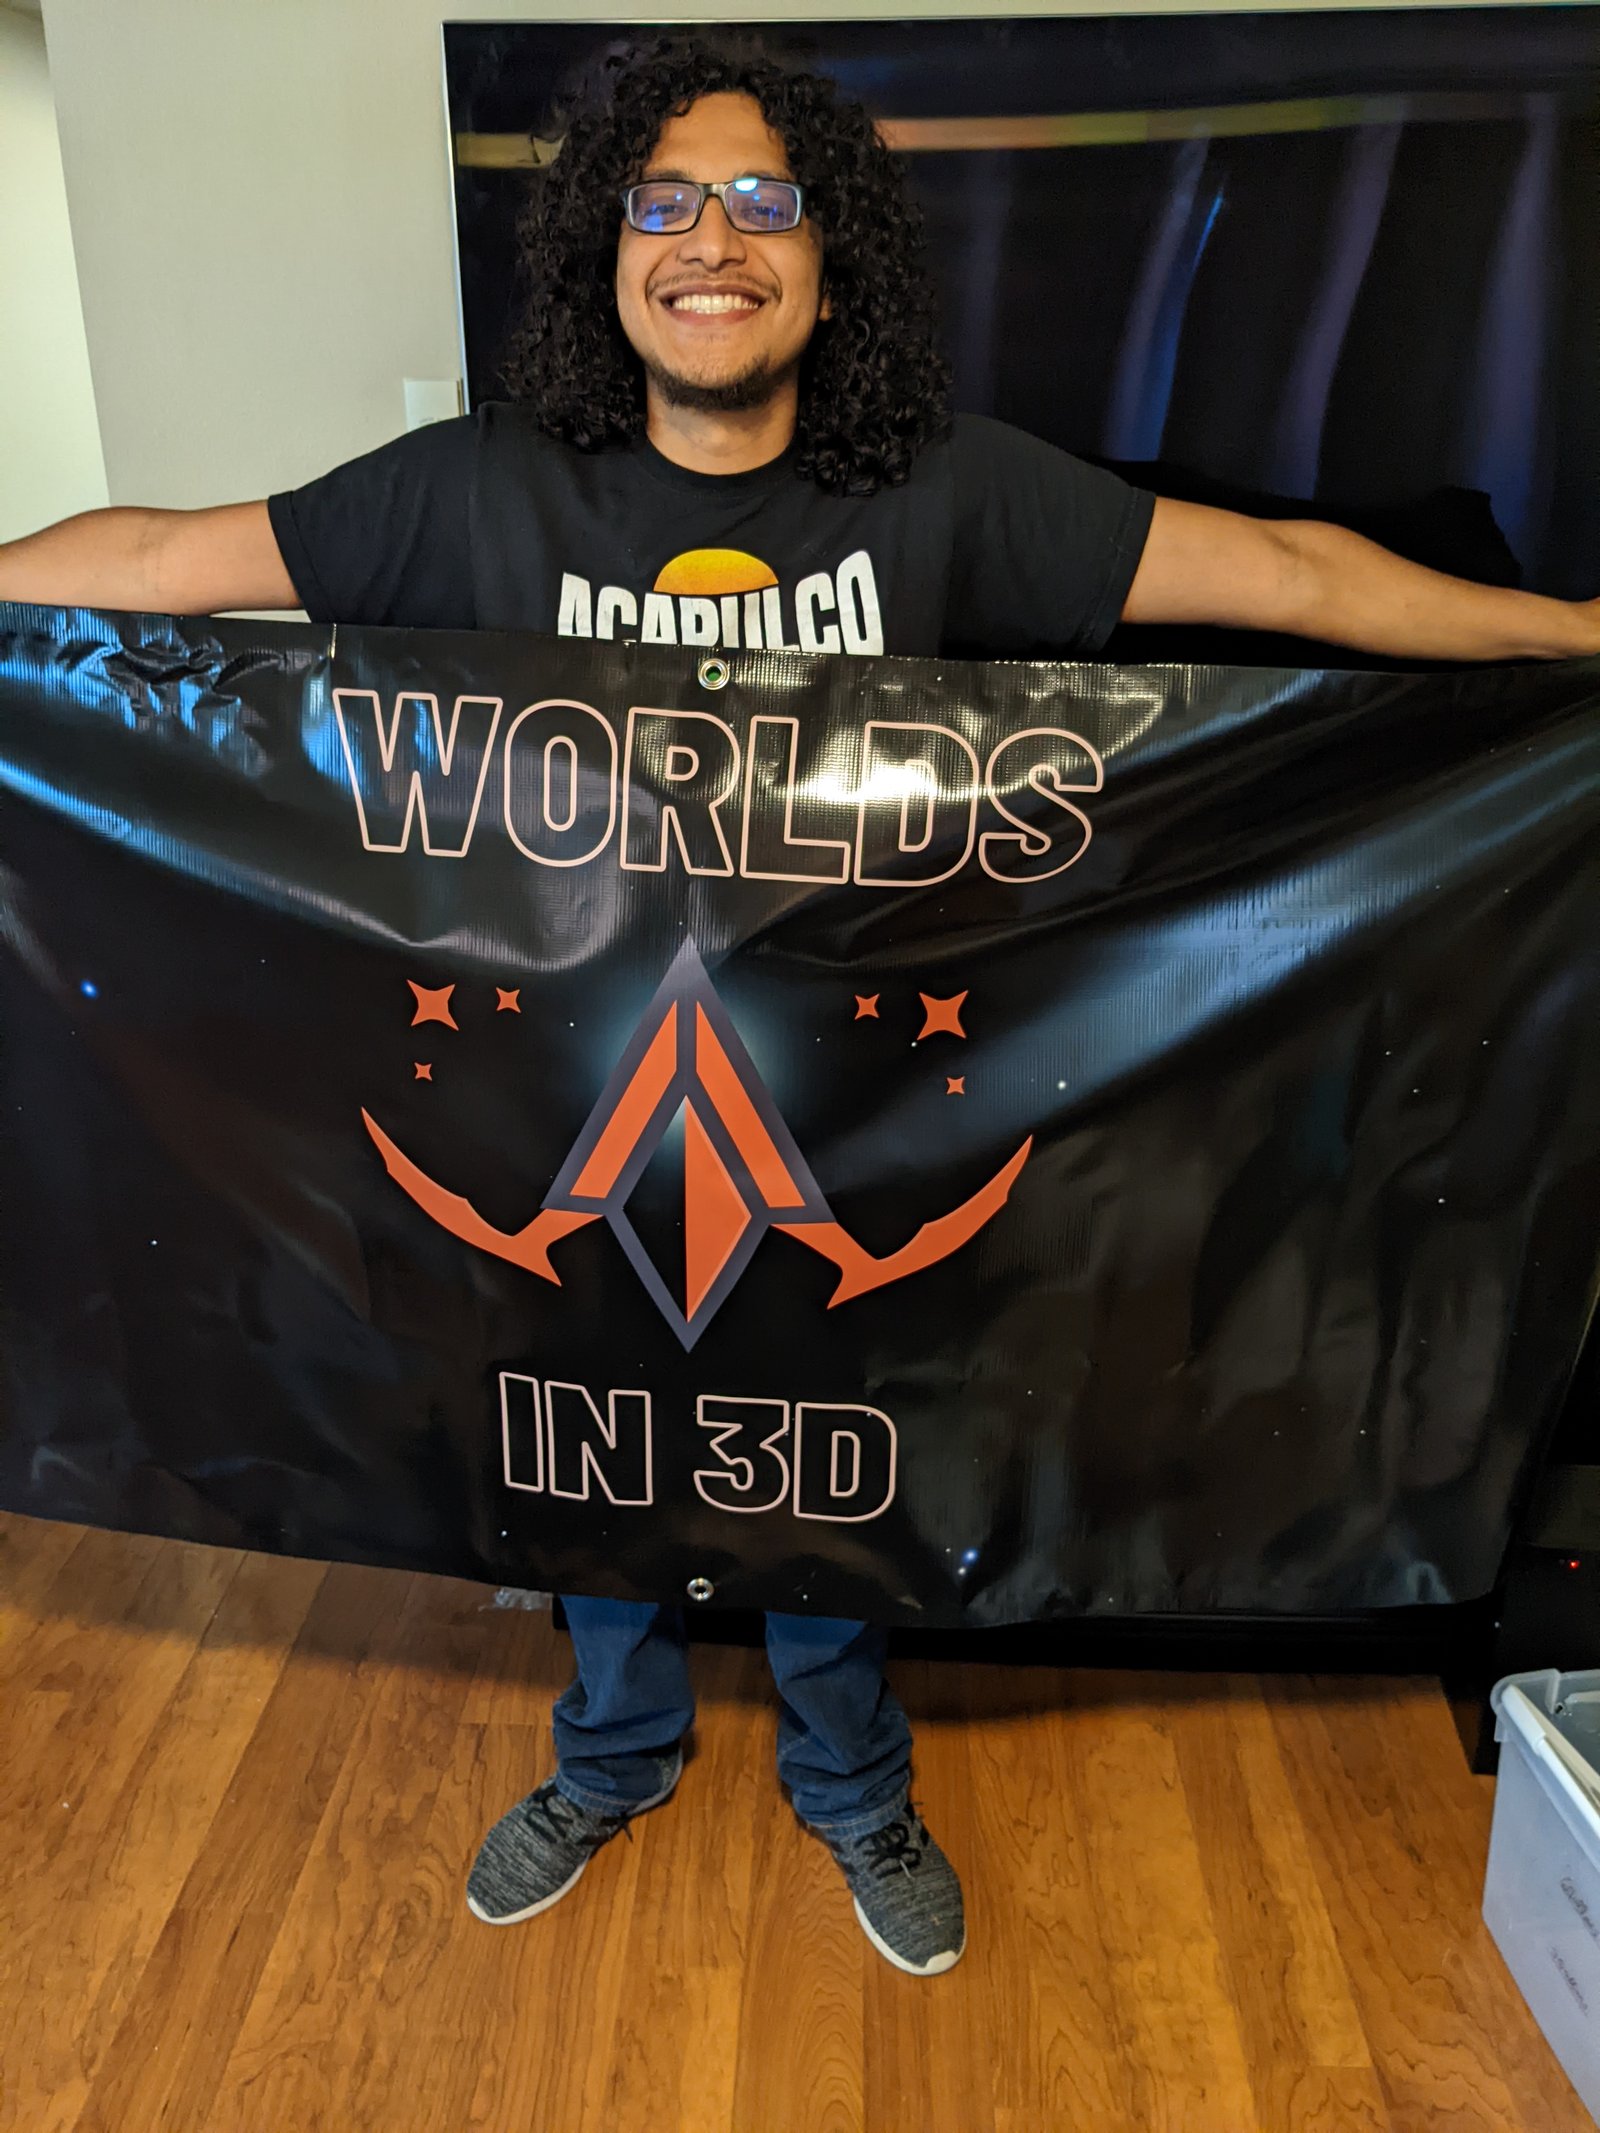 Owner of Worlds in 3D holding their banner